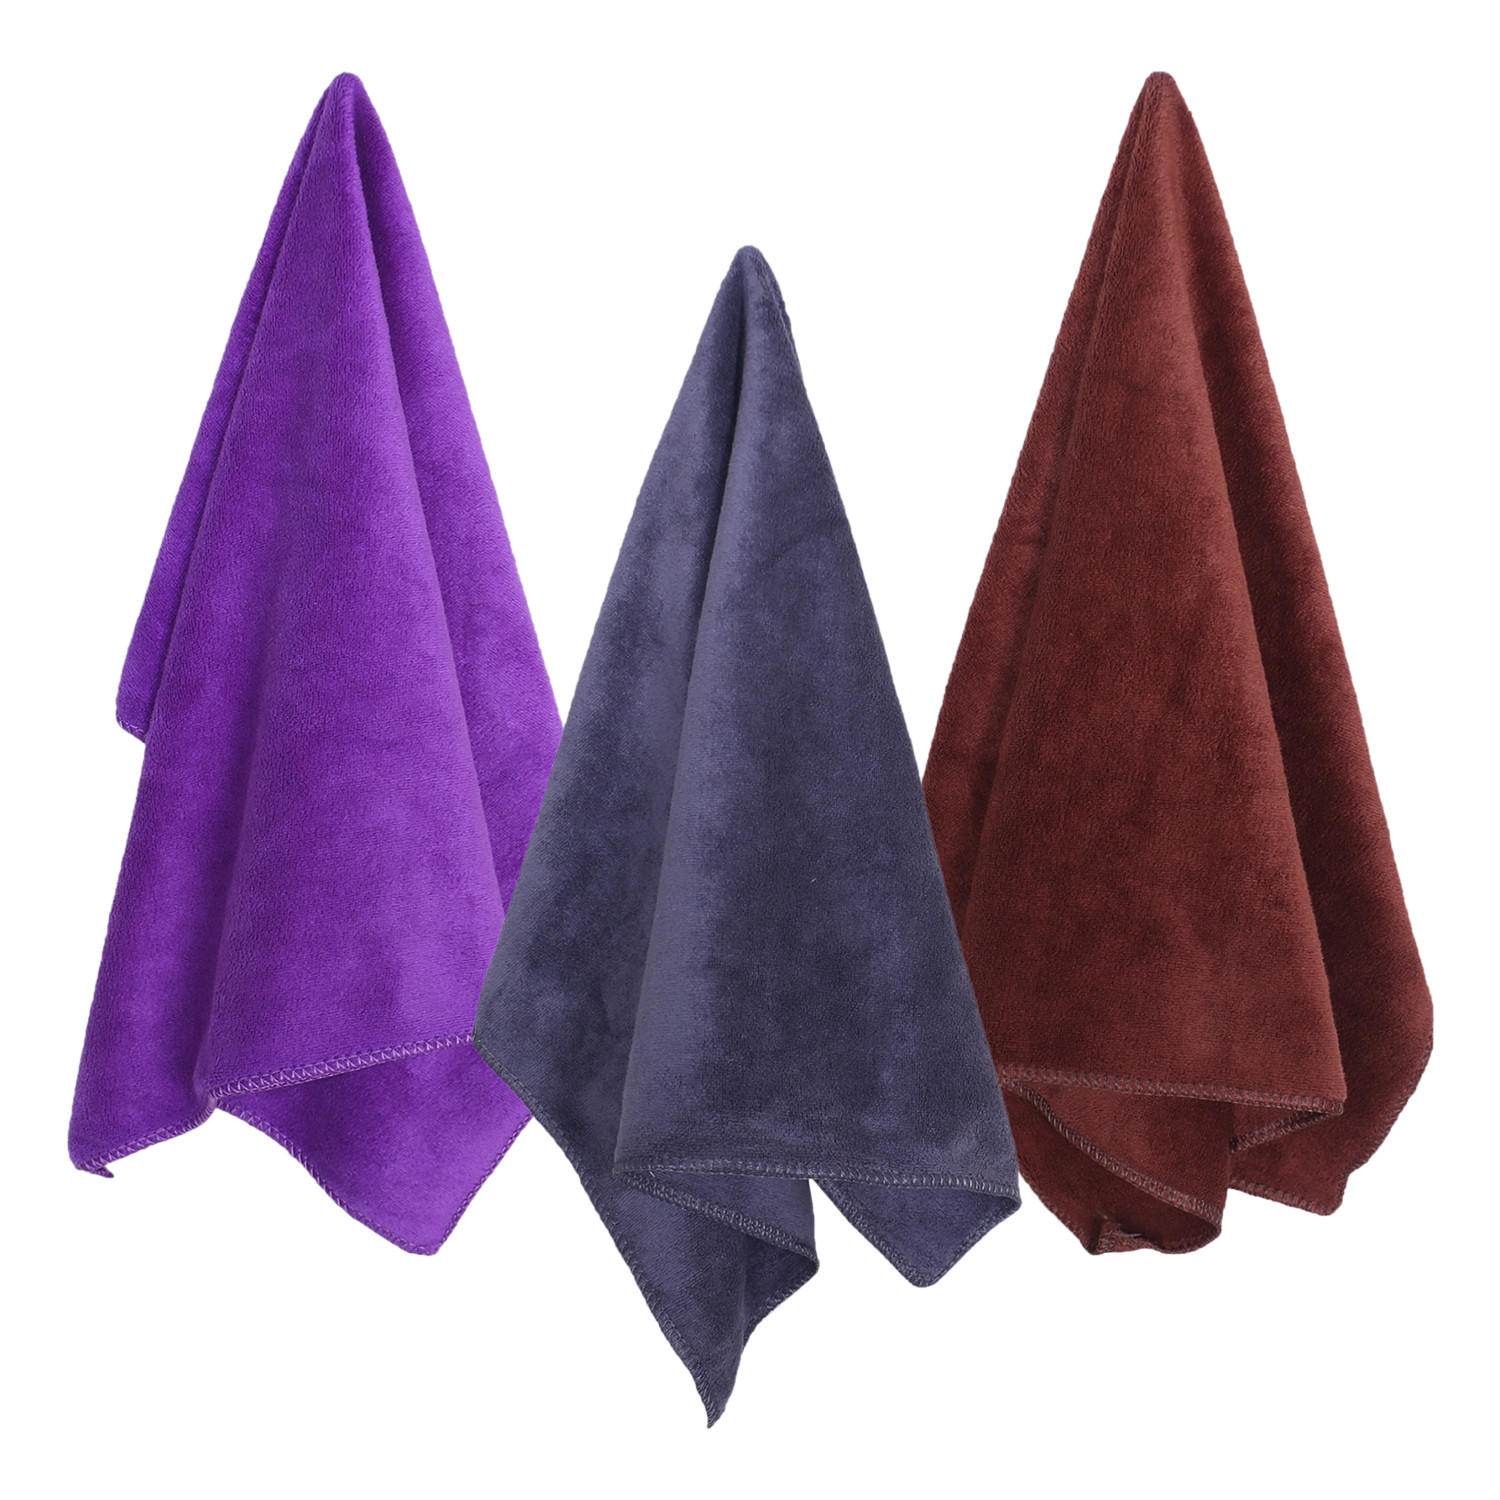 Kuber Industries Cleaning Cloths|Microfiber Highly Absorbent Wash Towels for Kitchen,Car,Window,24 x 16 Inch,Pack of 3 (Brown,Gray & Purple)